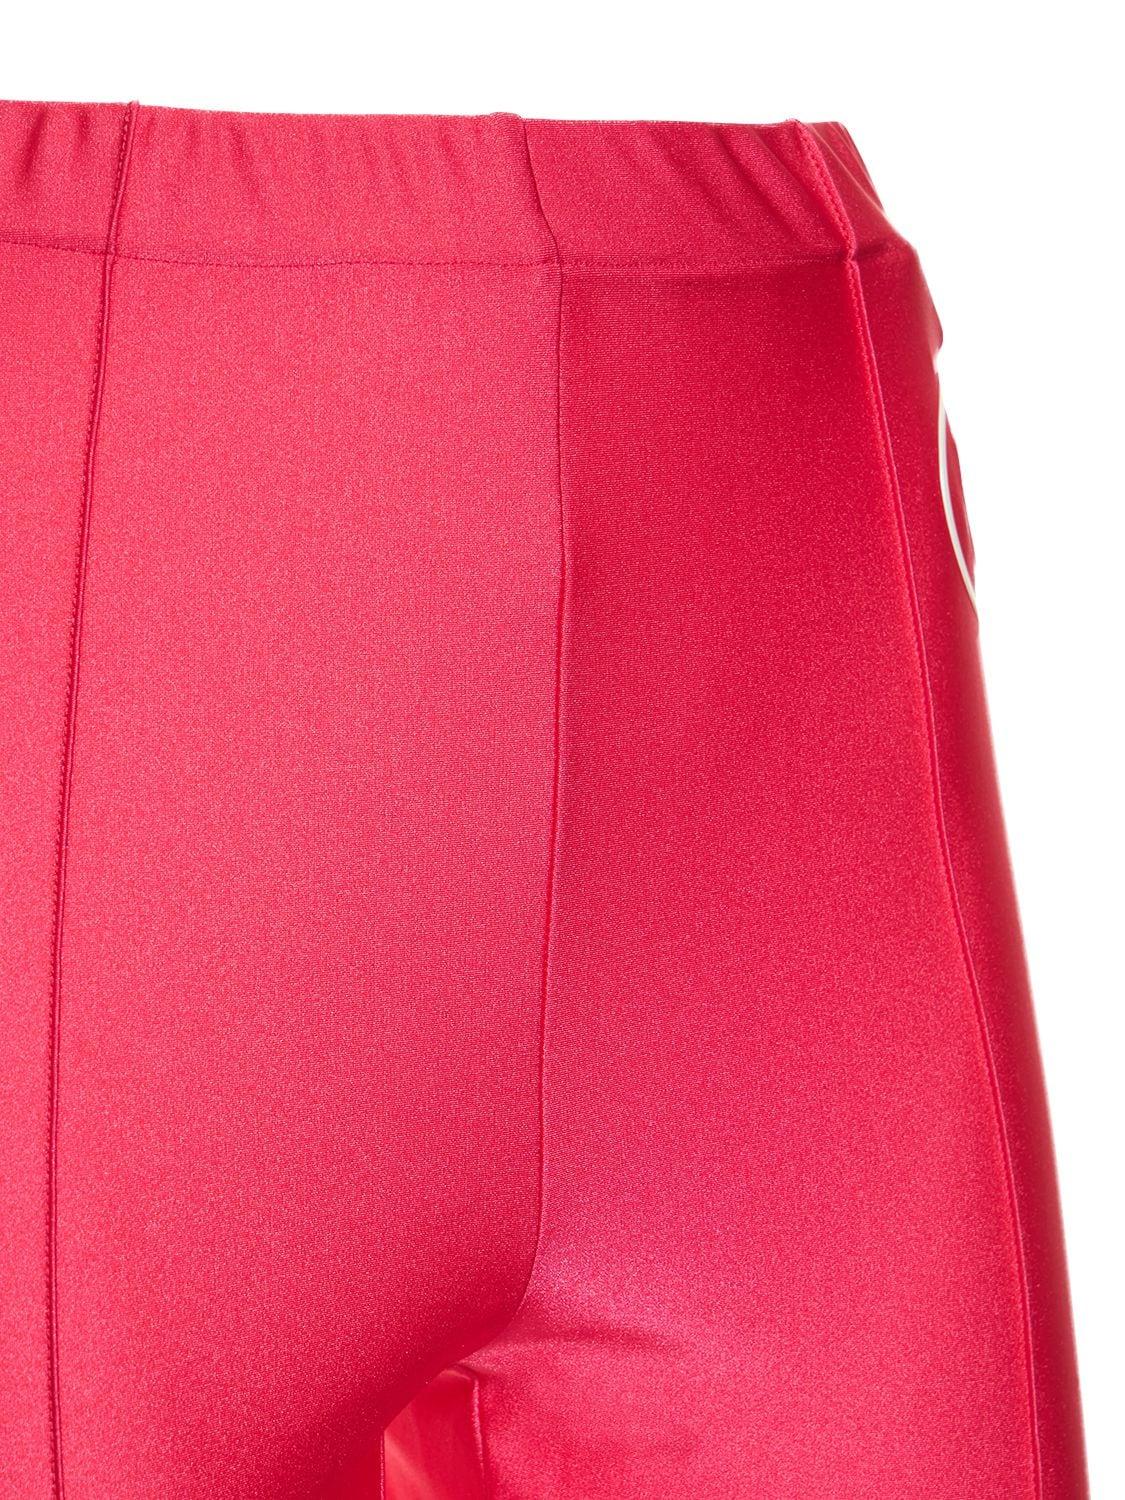 Gucci Sparkling Jersey Leggings in Red